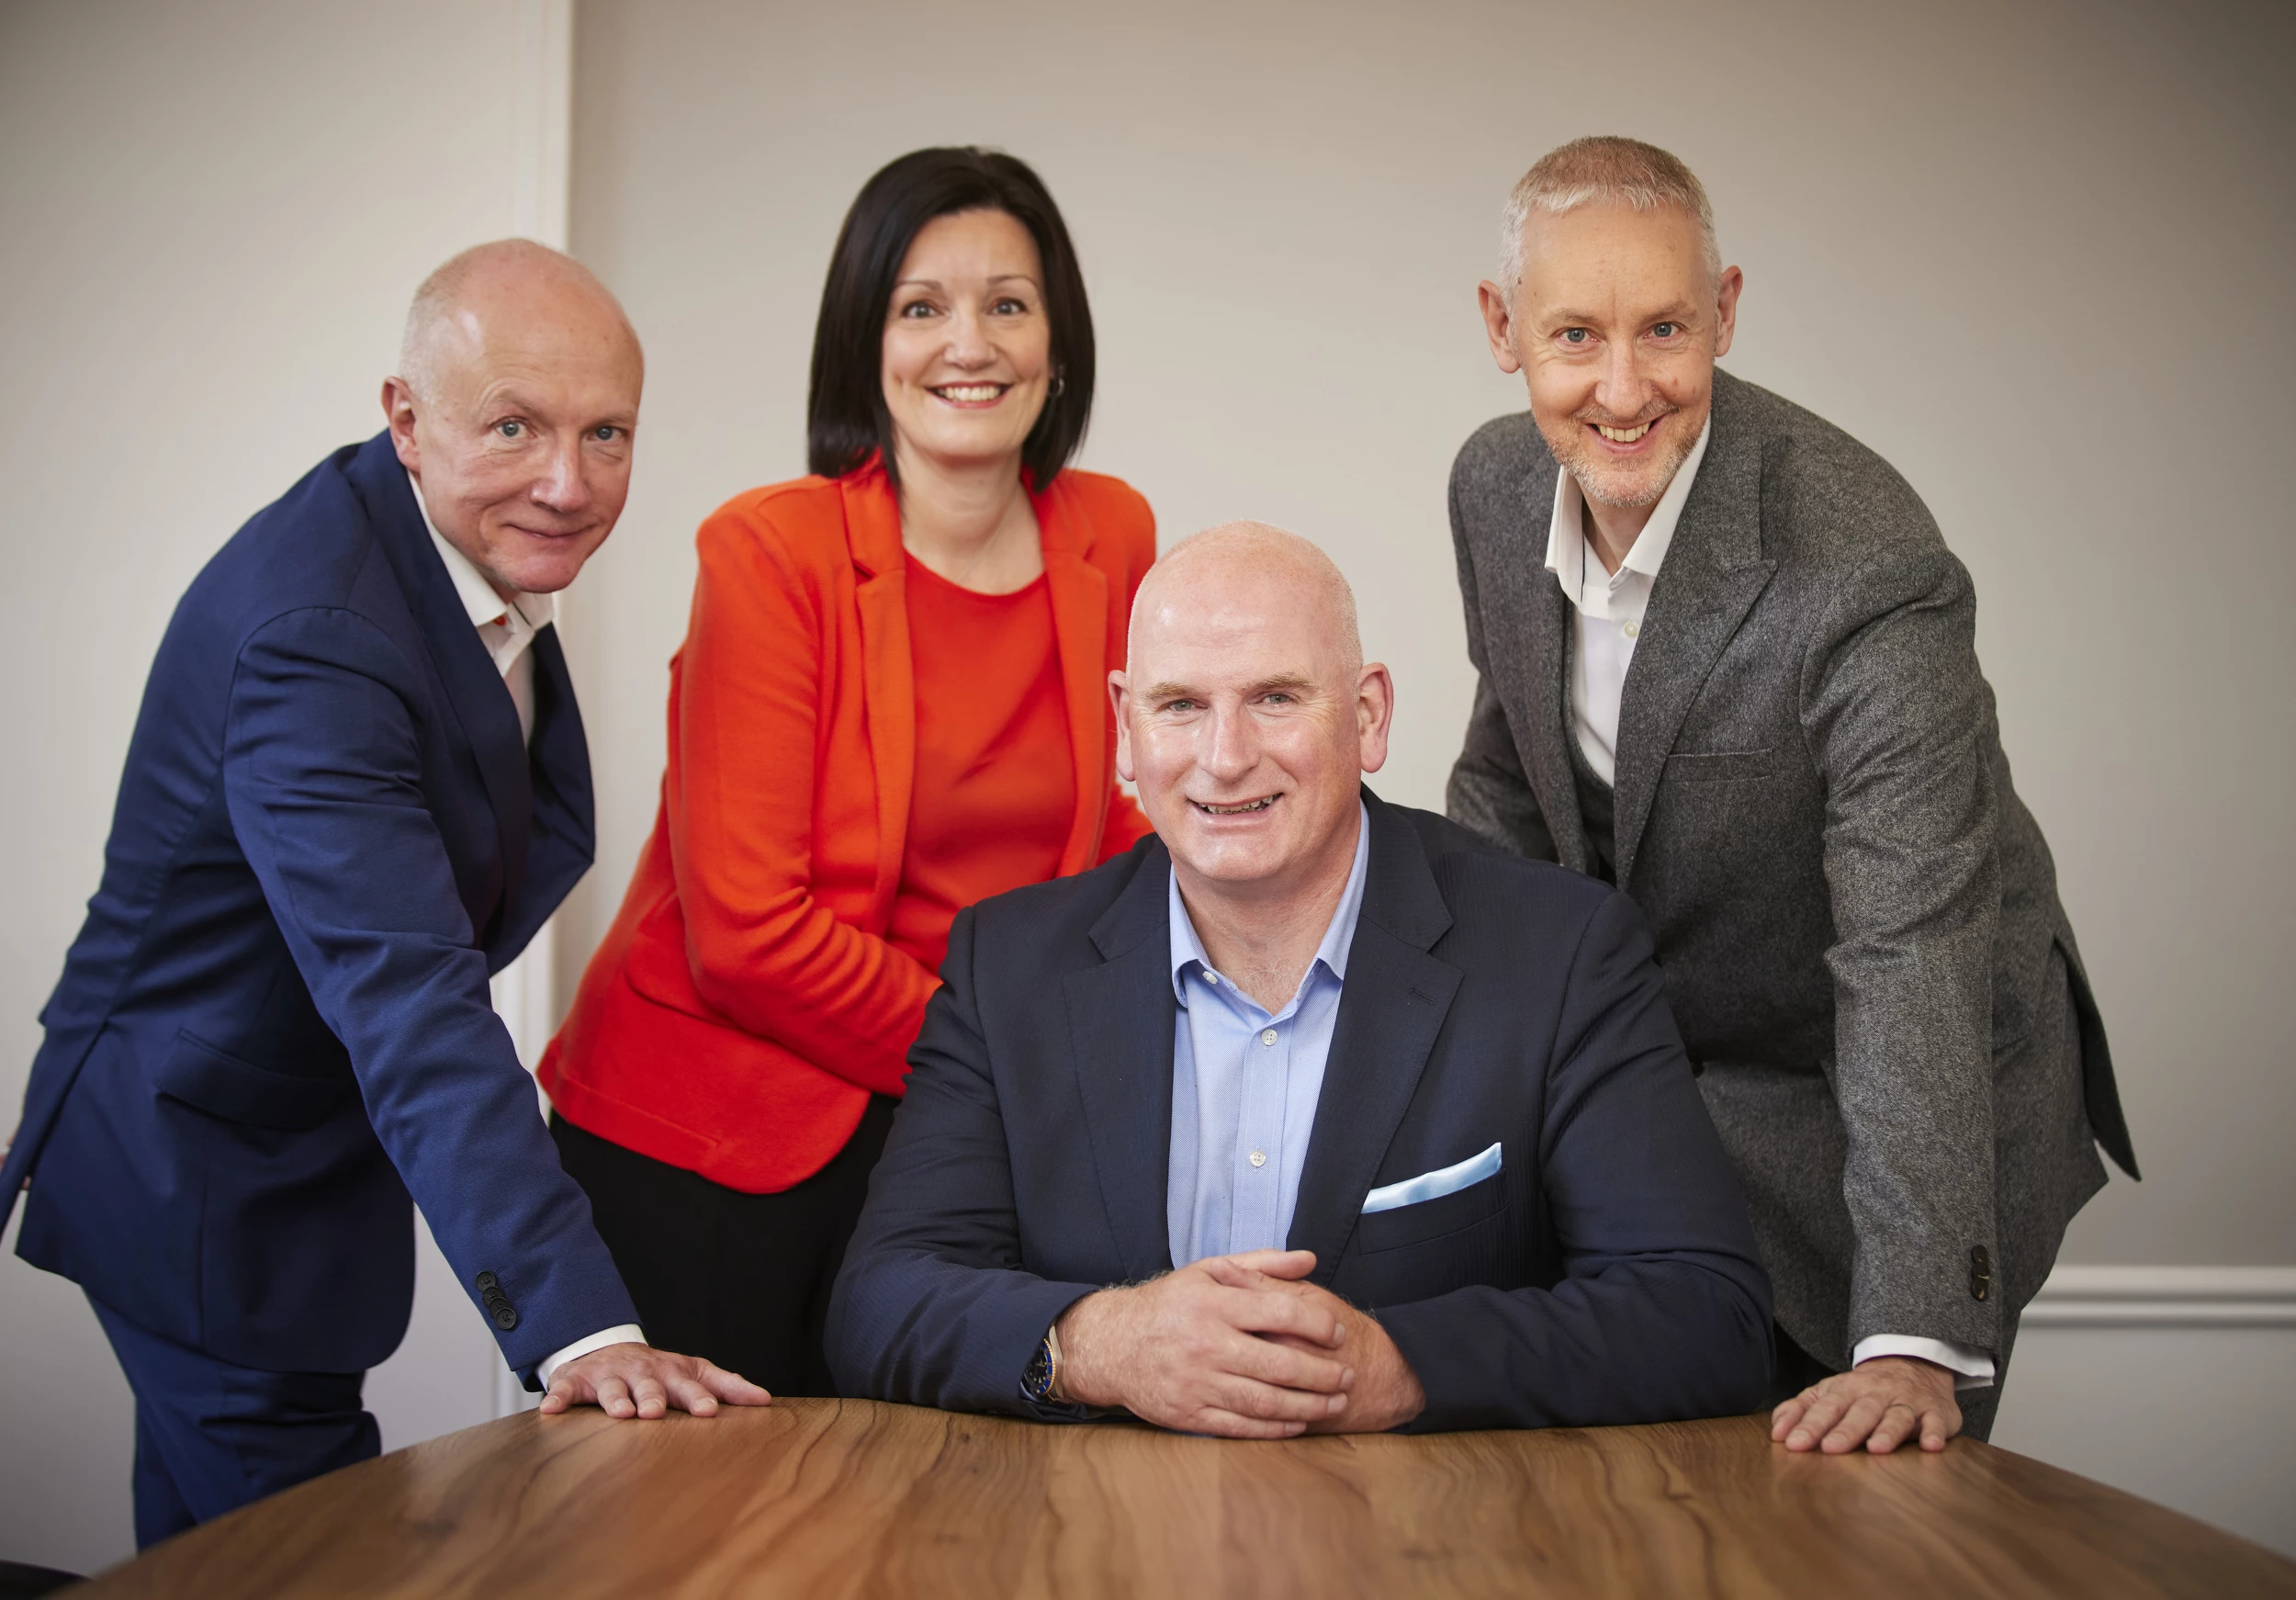 James Murphy is pictured, seated, with L-R Phil Foster, Caroline Munday and Lee Kingshott